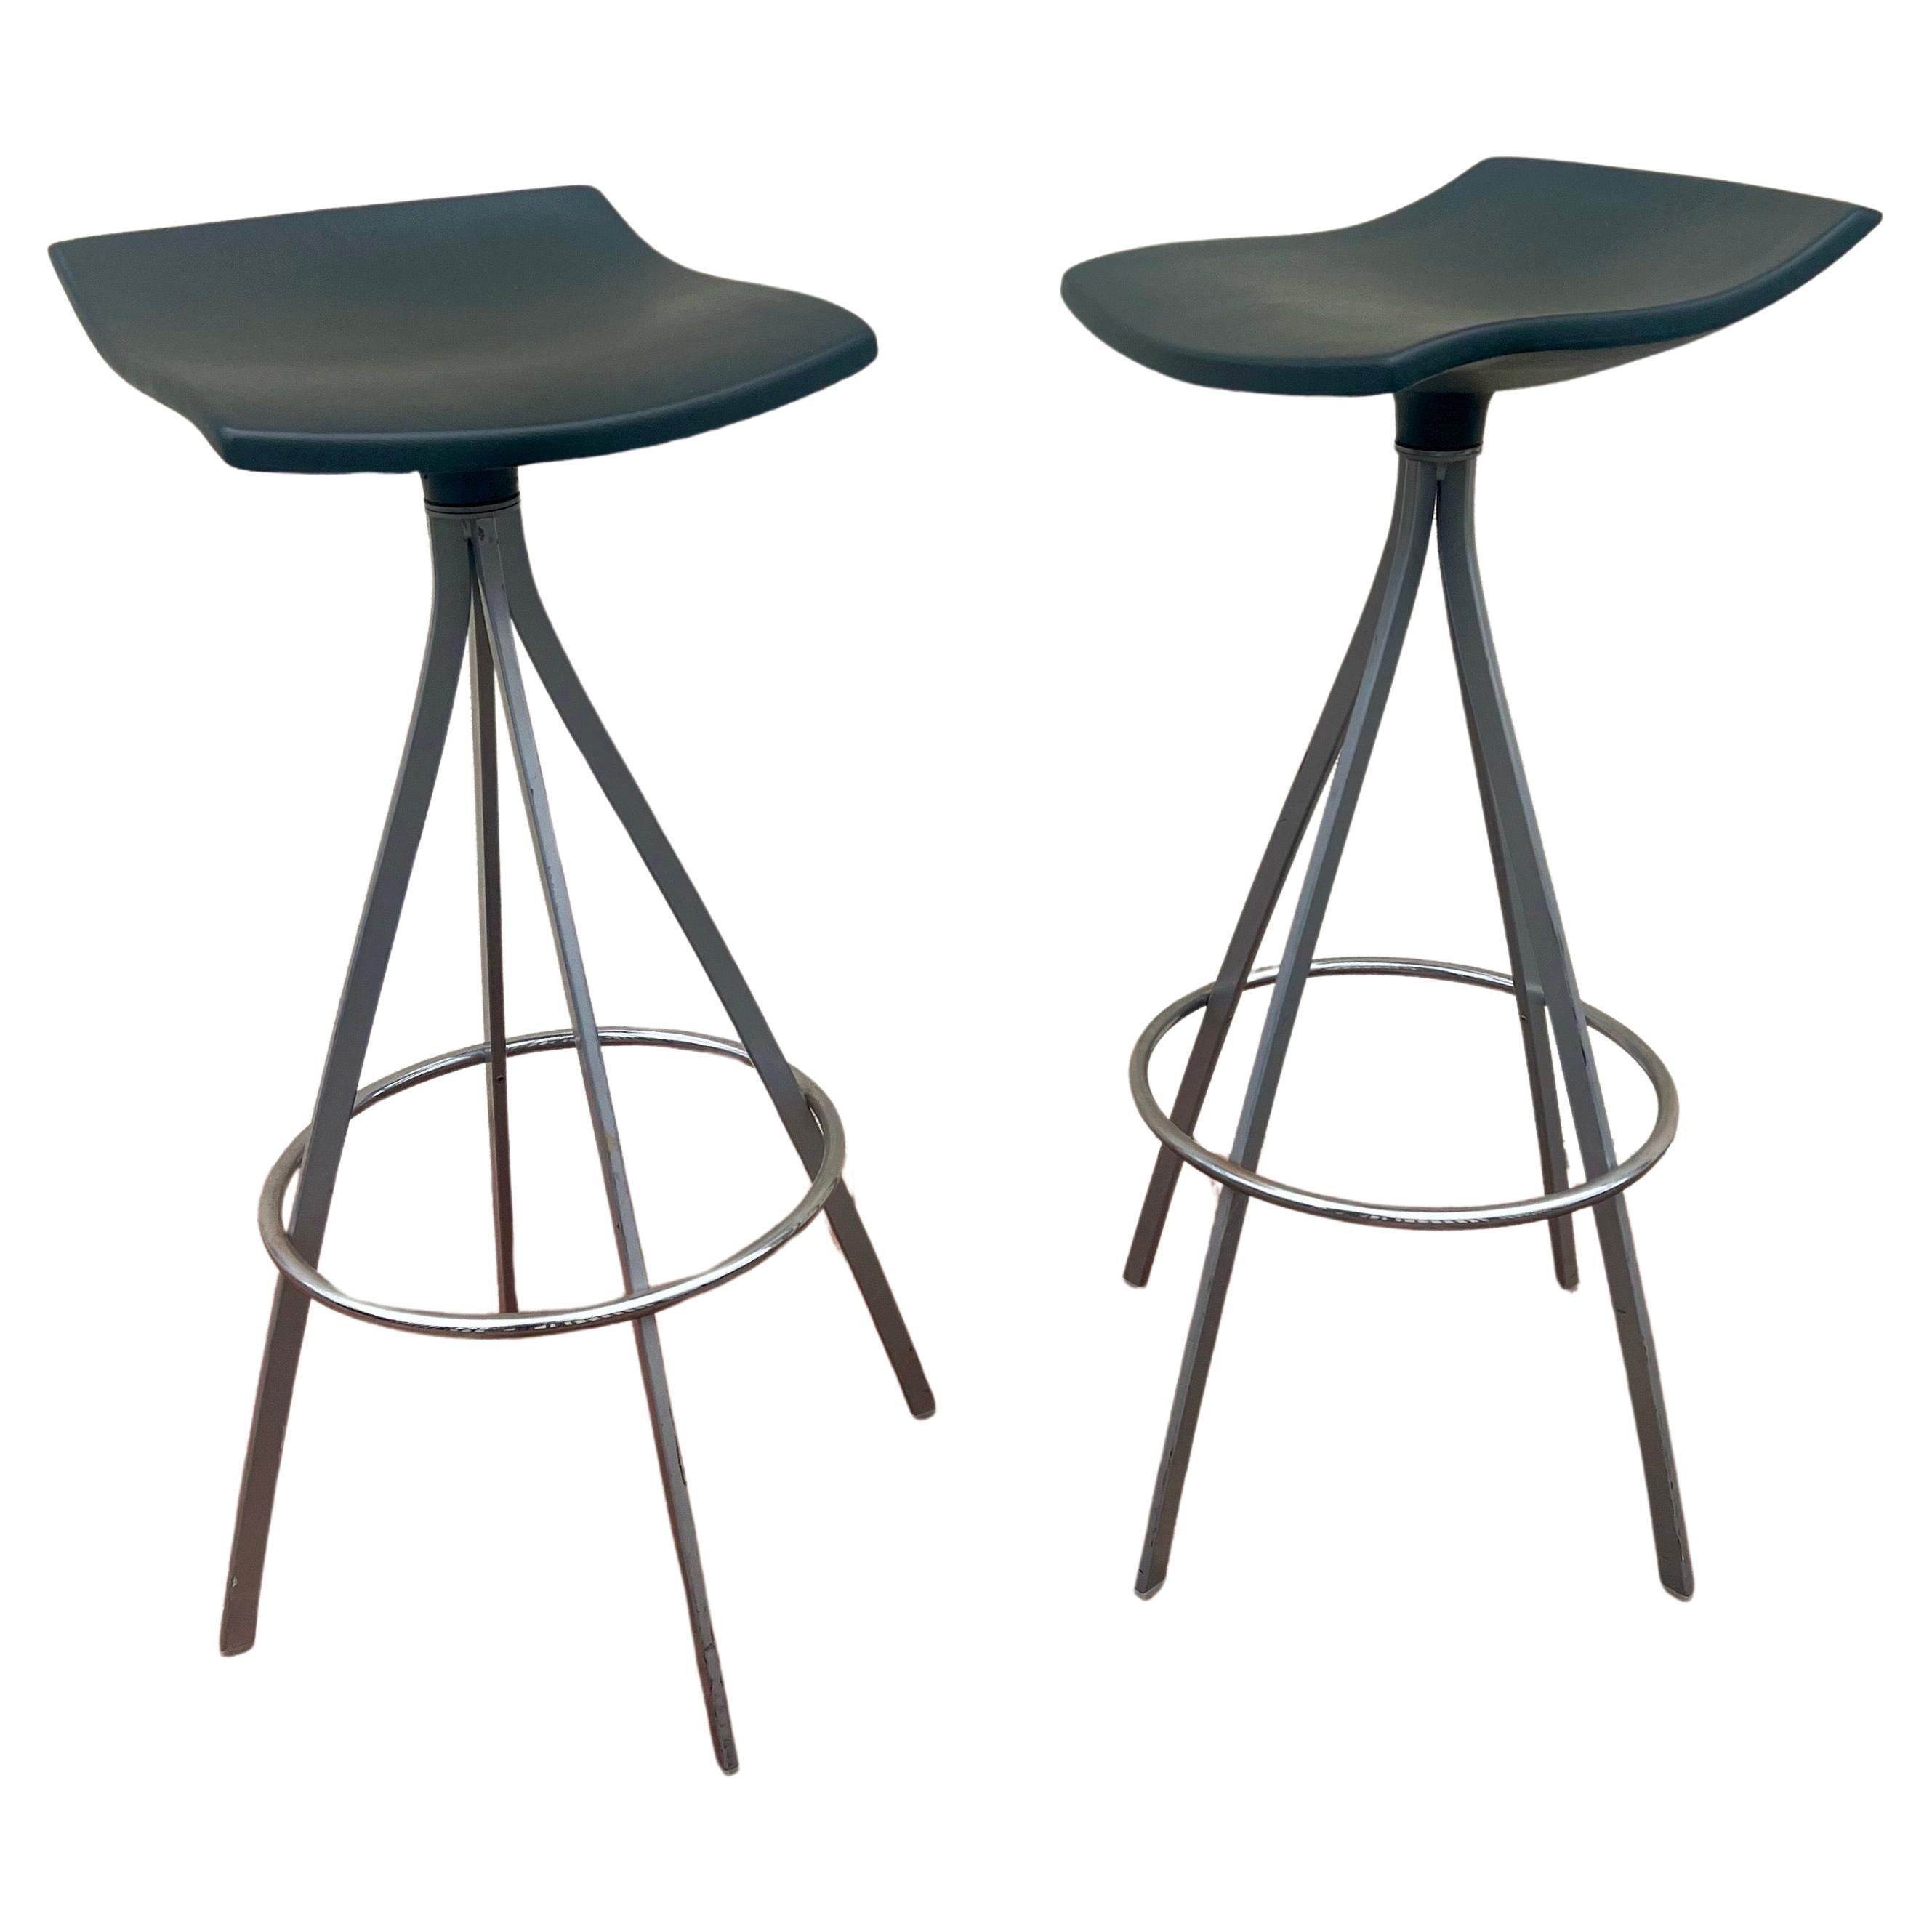 Pair of Postmodern stools Designed by Jorge Pensi for Mobles 114 Barcelona For Sale